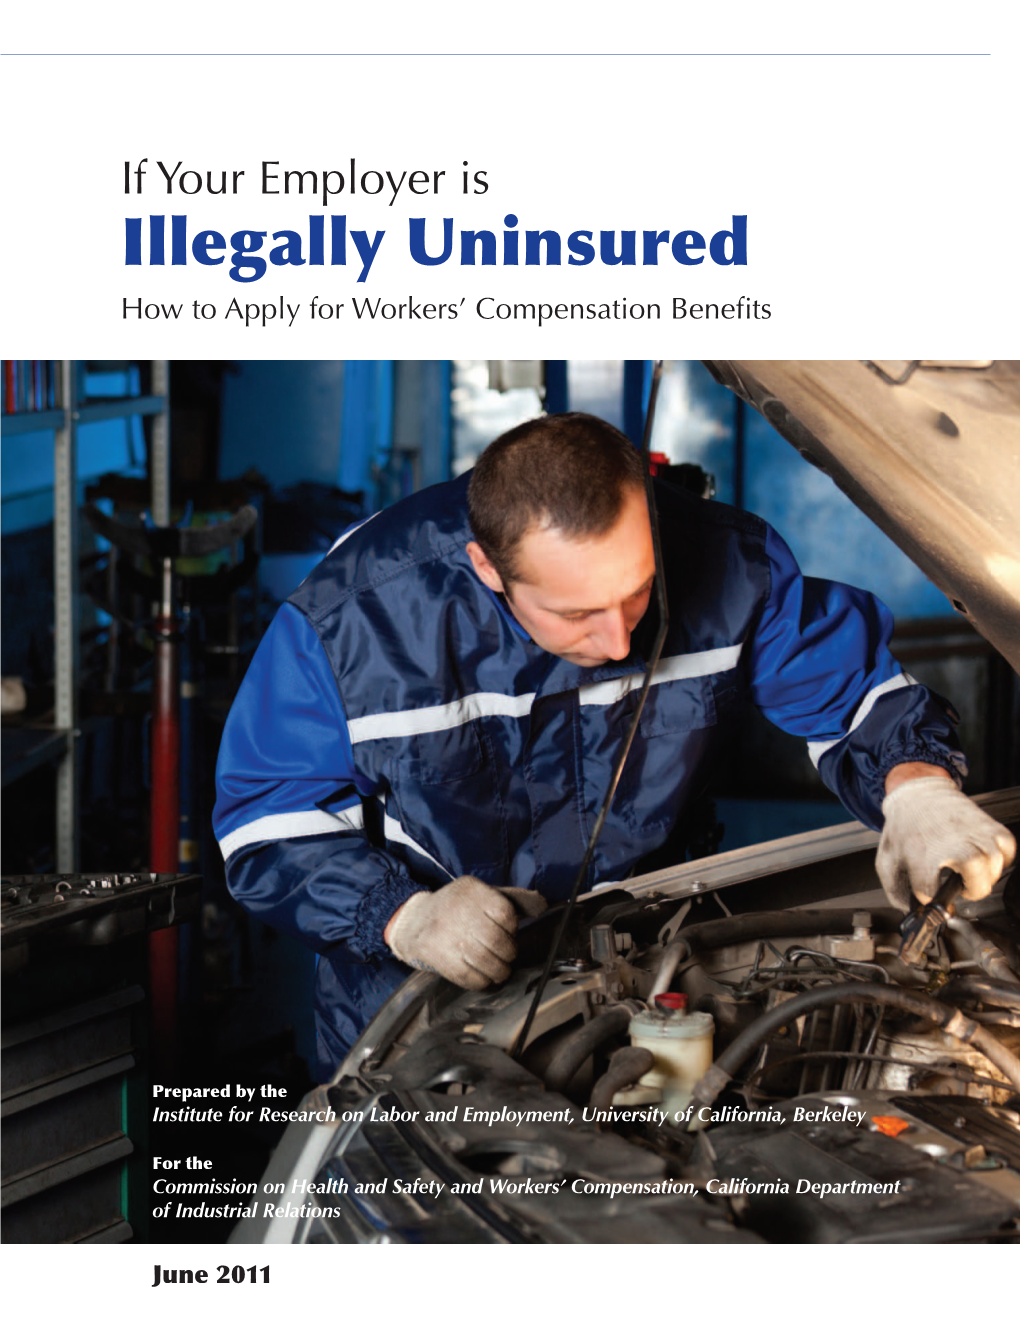 If Your Employer Is Illegally Uninsured How to Apply for Workers’ Compensation Benefits